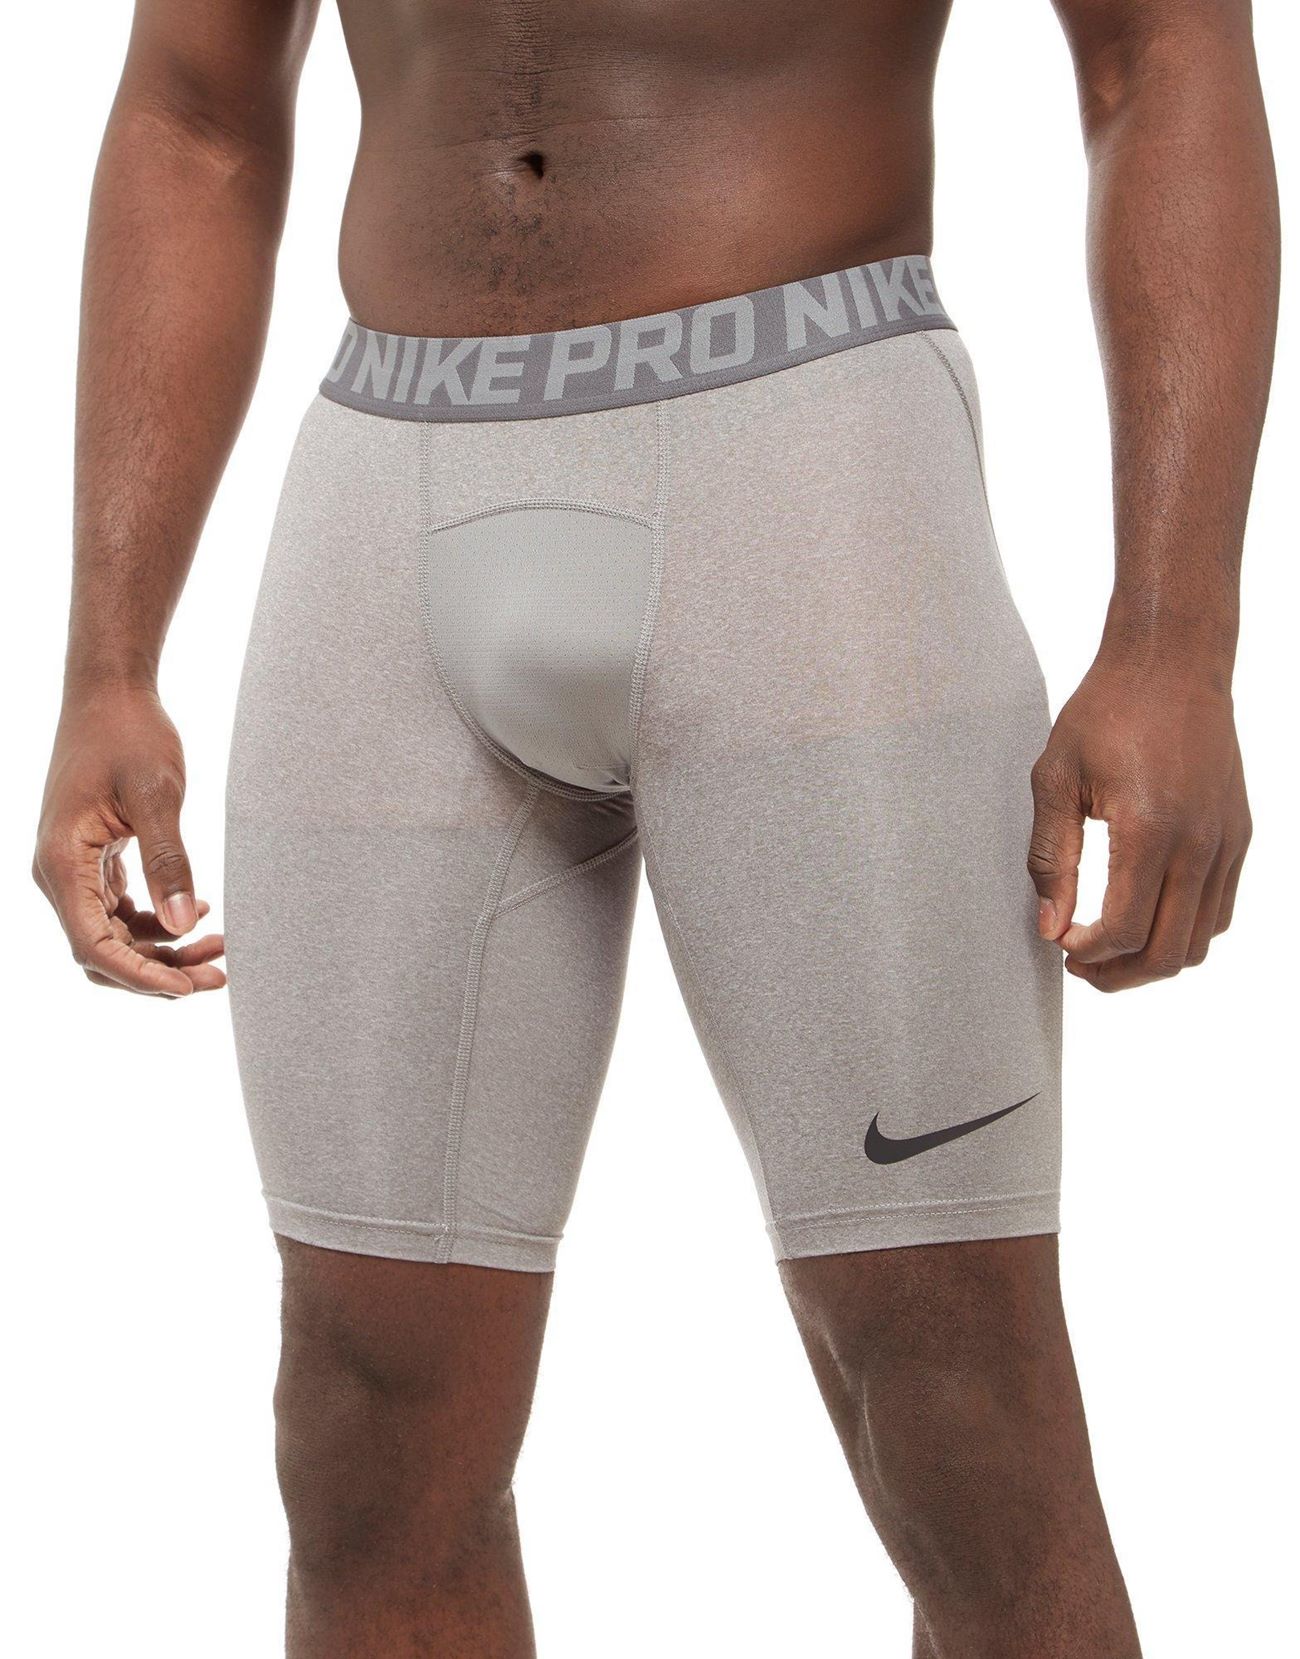 12 Incredible Men’s Nike Compression Shorts For 2023